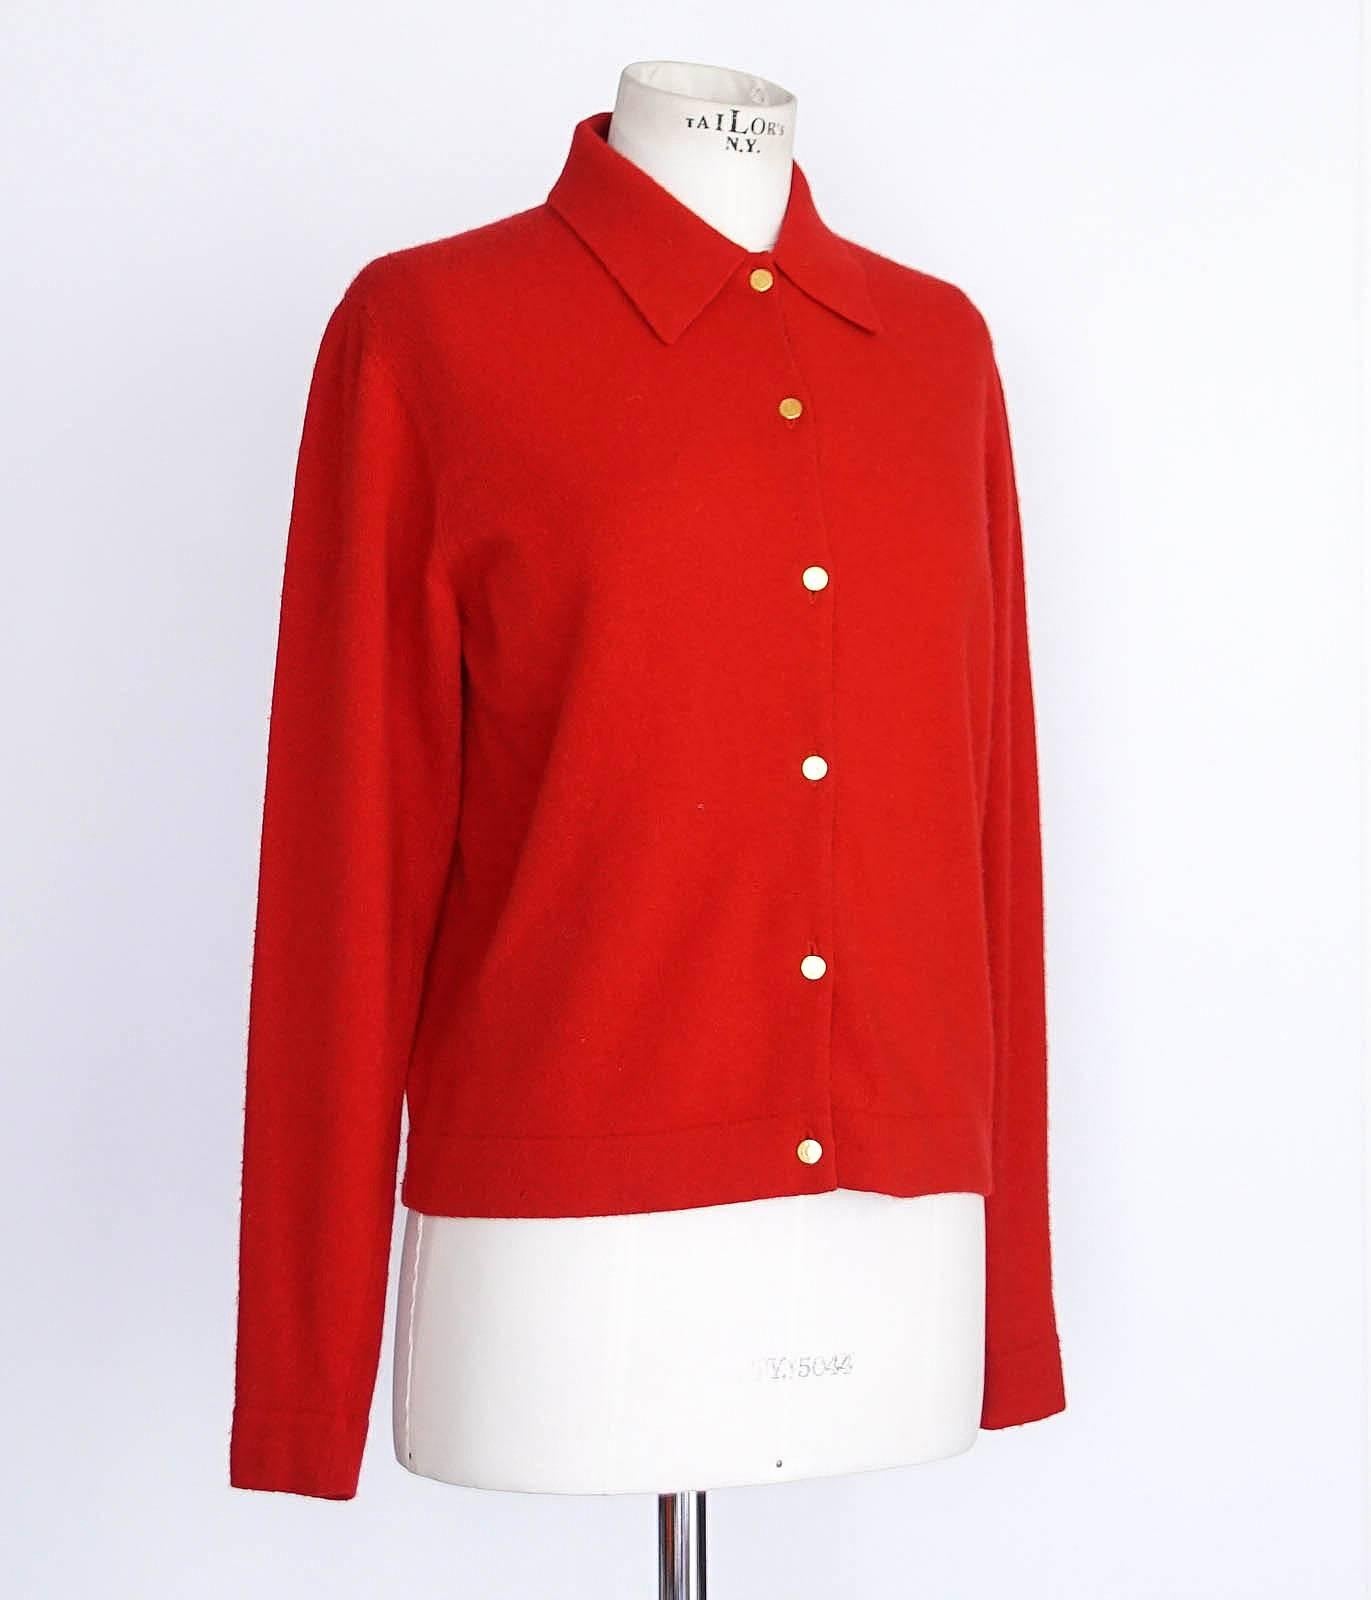 Guaranteed authentic HERMES red cashmere cardigan sweater. 
Vintage peak collar front button cardigan in a rich red.
6 gold embossed buttons.
Fabric is 100% cashmere.
final sale

SIZE XL

CARDIGAN MEASURES: 
LENGTH   24